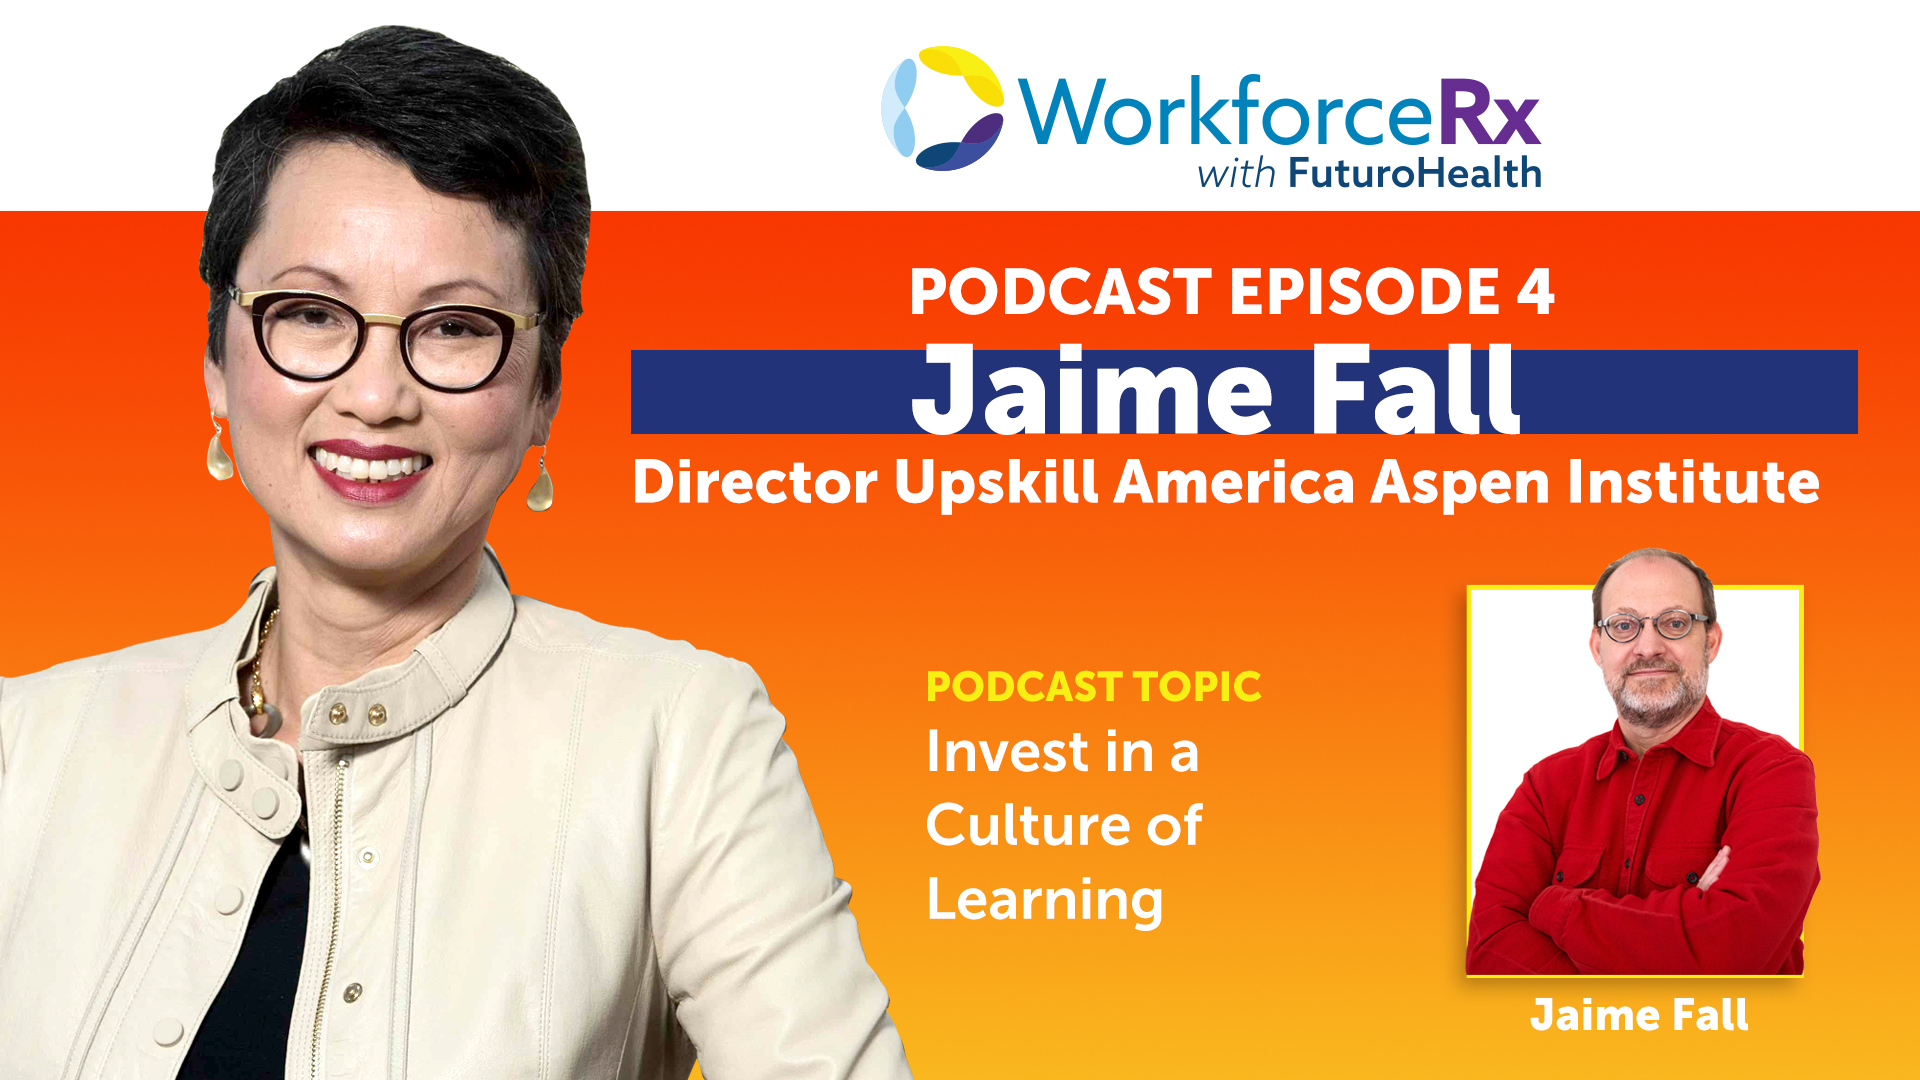 Jaime Fall, Director of UpSkill America at the Aspen Institute: Invest in a Culture of Learning